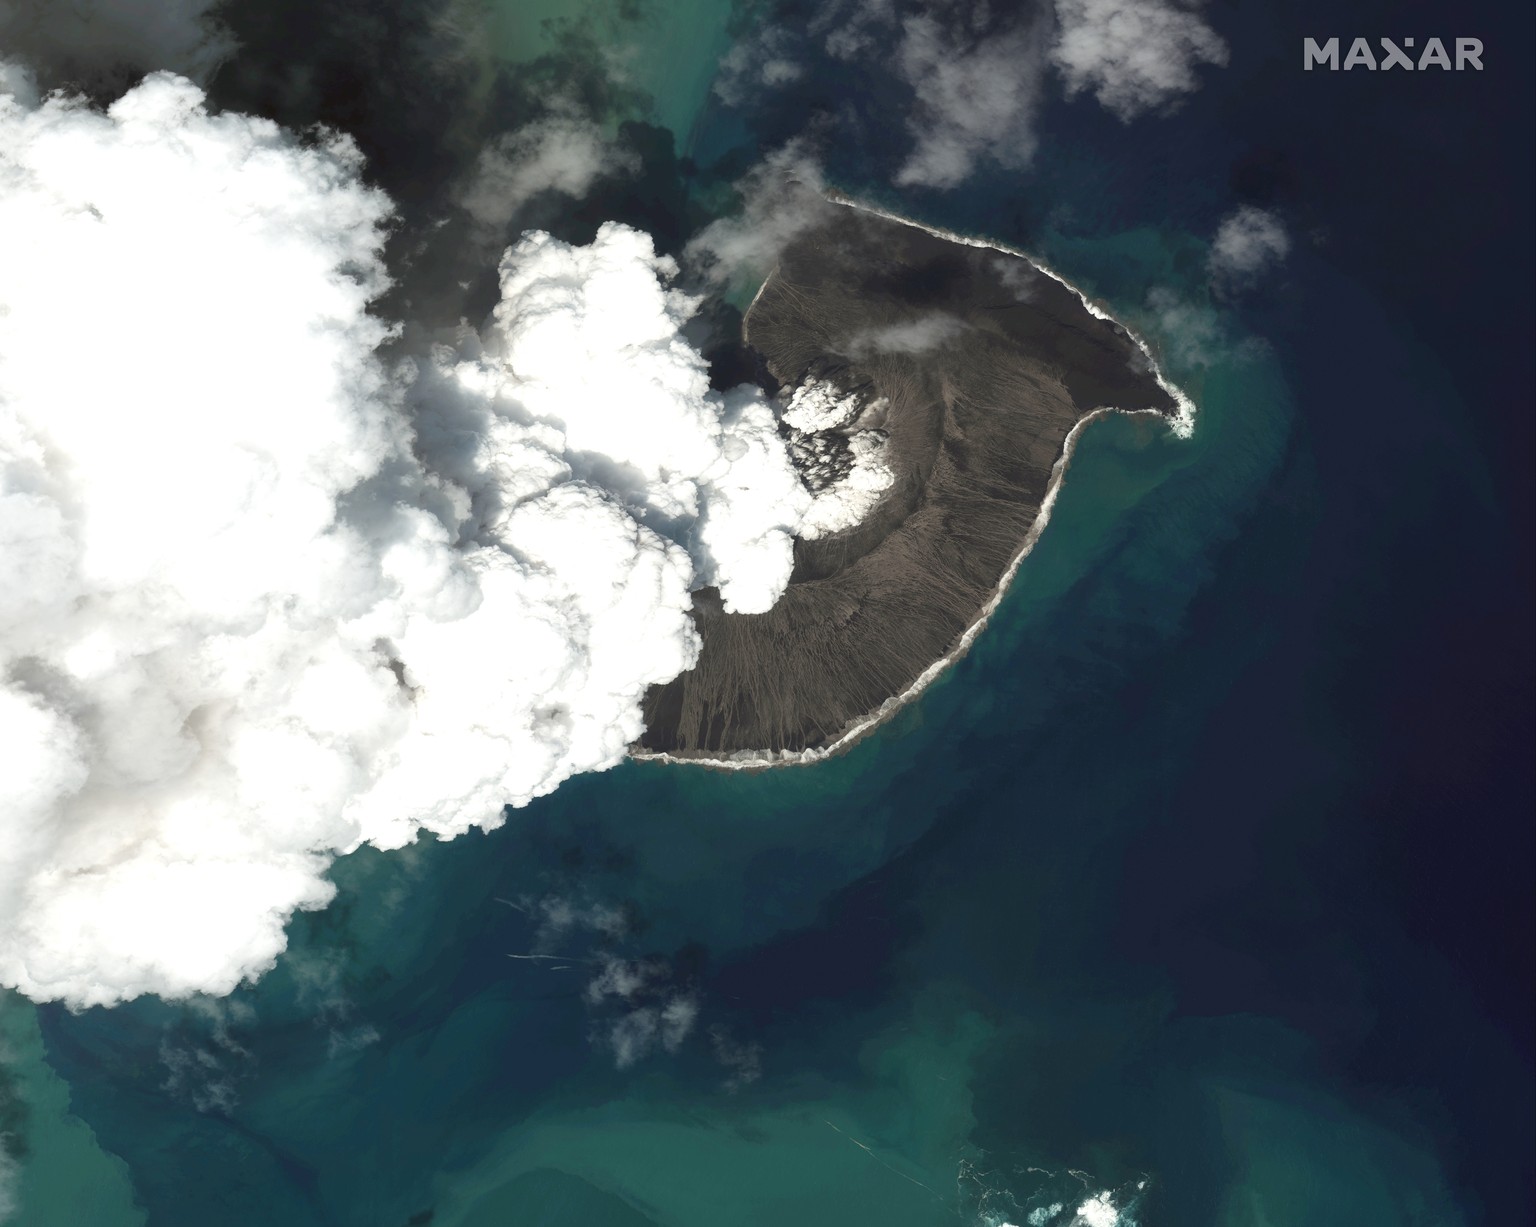 This satellite image provided by Maxar Technologies shows an overview of Hunga Tonga Hunga Ha